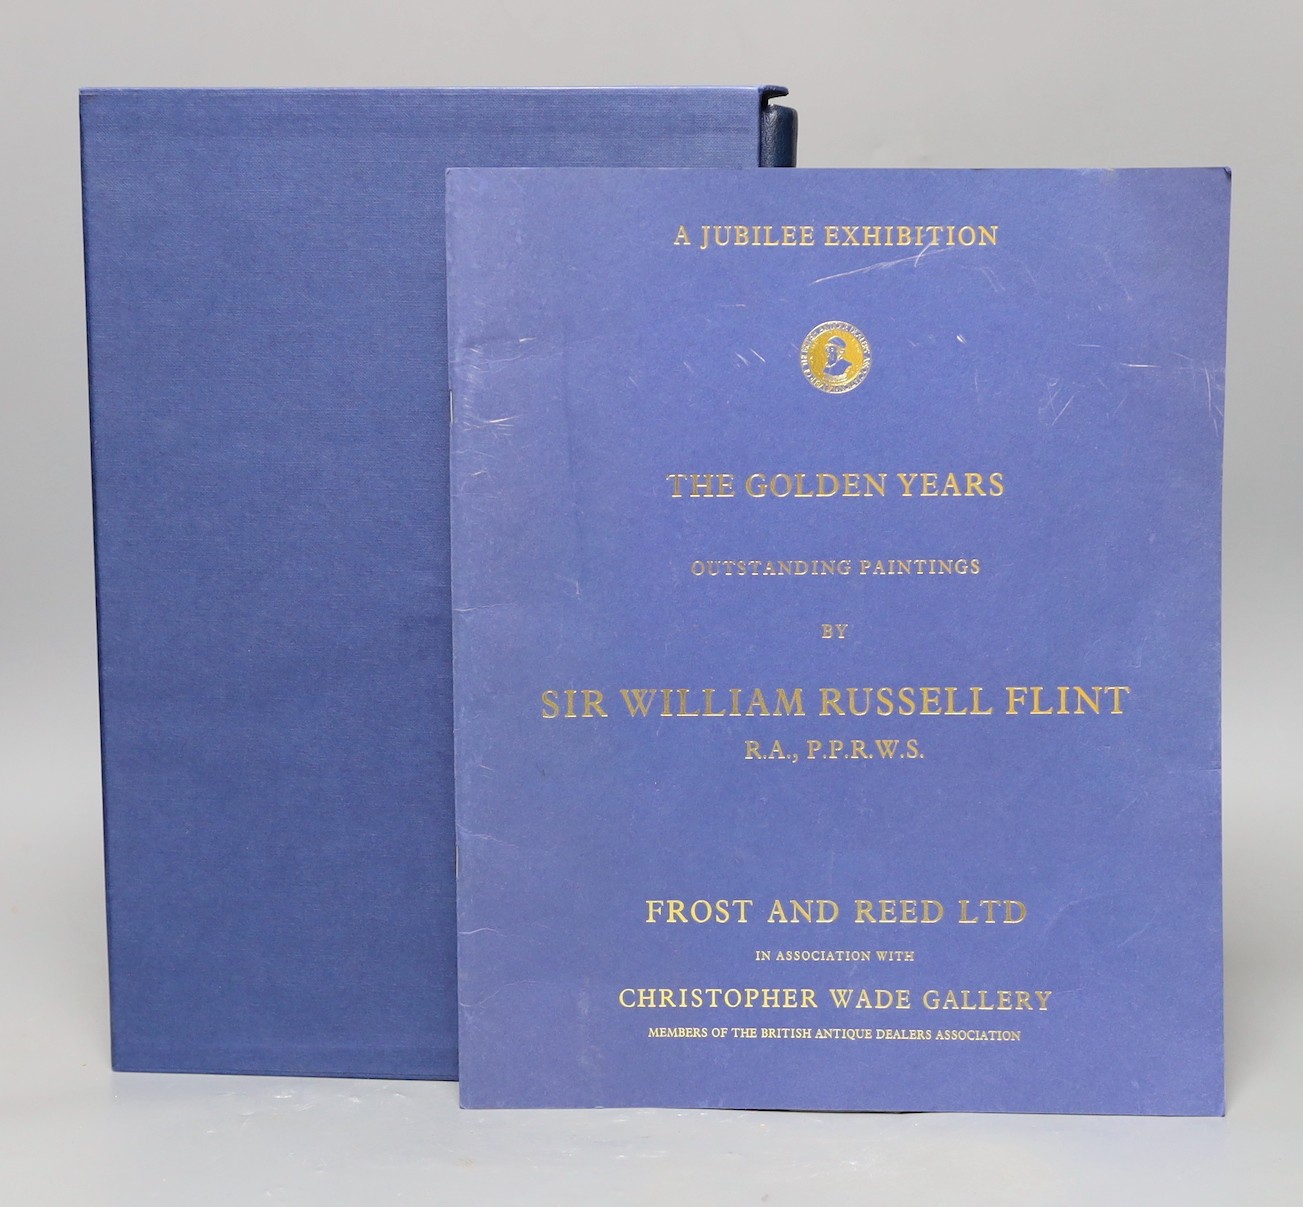 Flint, Sir William Russell - In Pursuit, an Autobiography, 4to, one of 150, signed, in original full morocco gilt, The Medici Society Ltd., London, 1969, in slip case, together with a Jubilee Exhibition catalogue of The